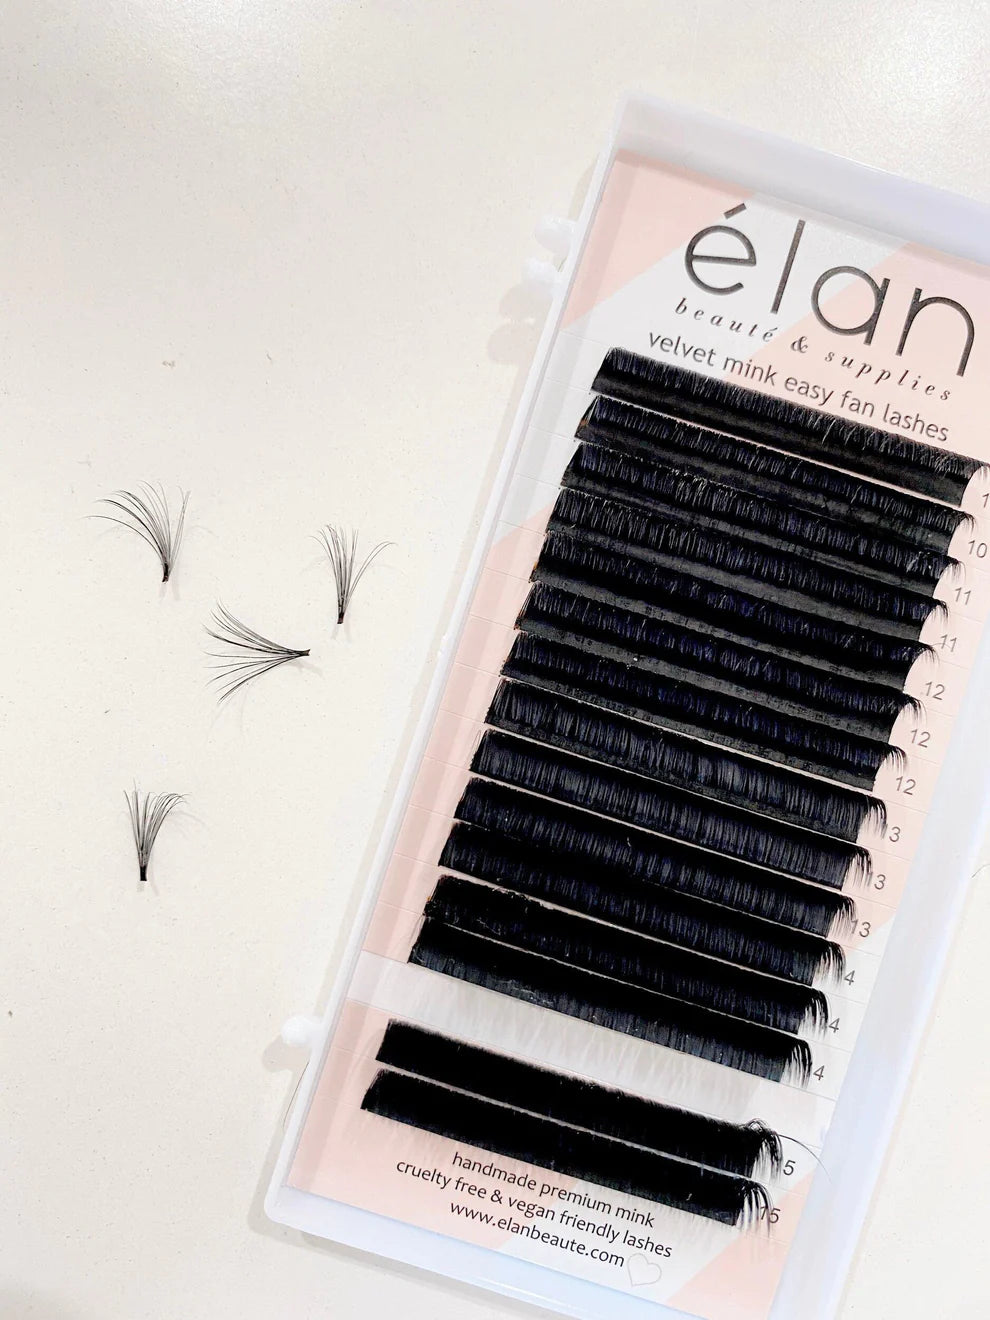 EASY FAN LASHES - WHAT ARE THEY AND HOW TO USE THEM